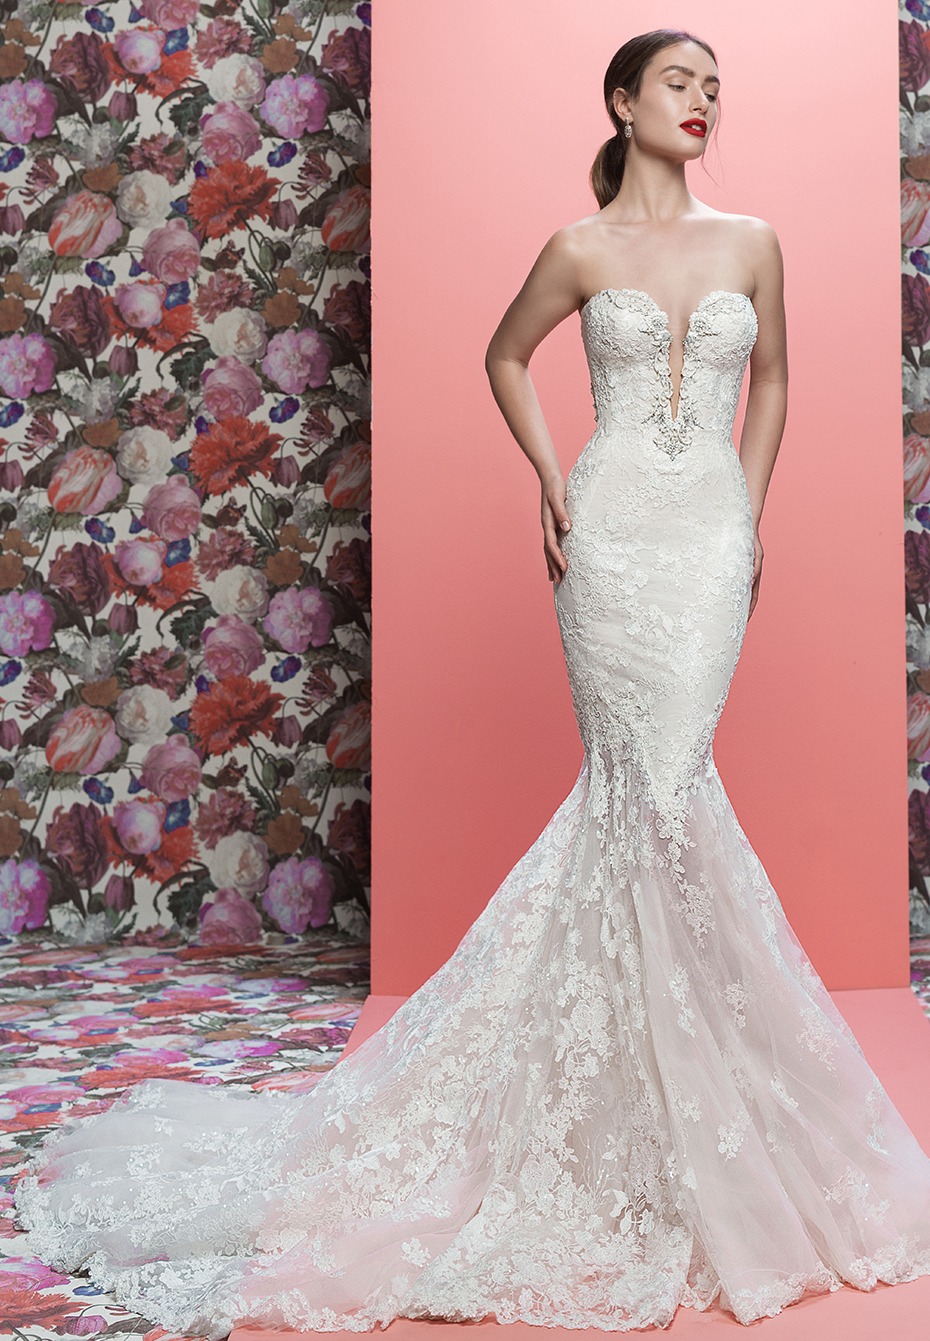 The Lorraine from Galia Lahav  - a strapless weddinggown with silver details